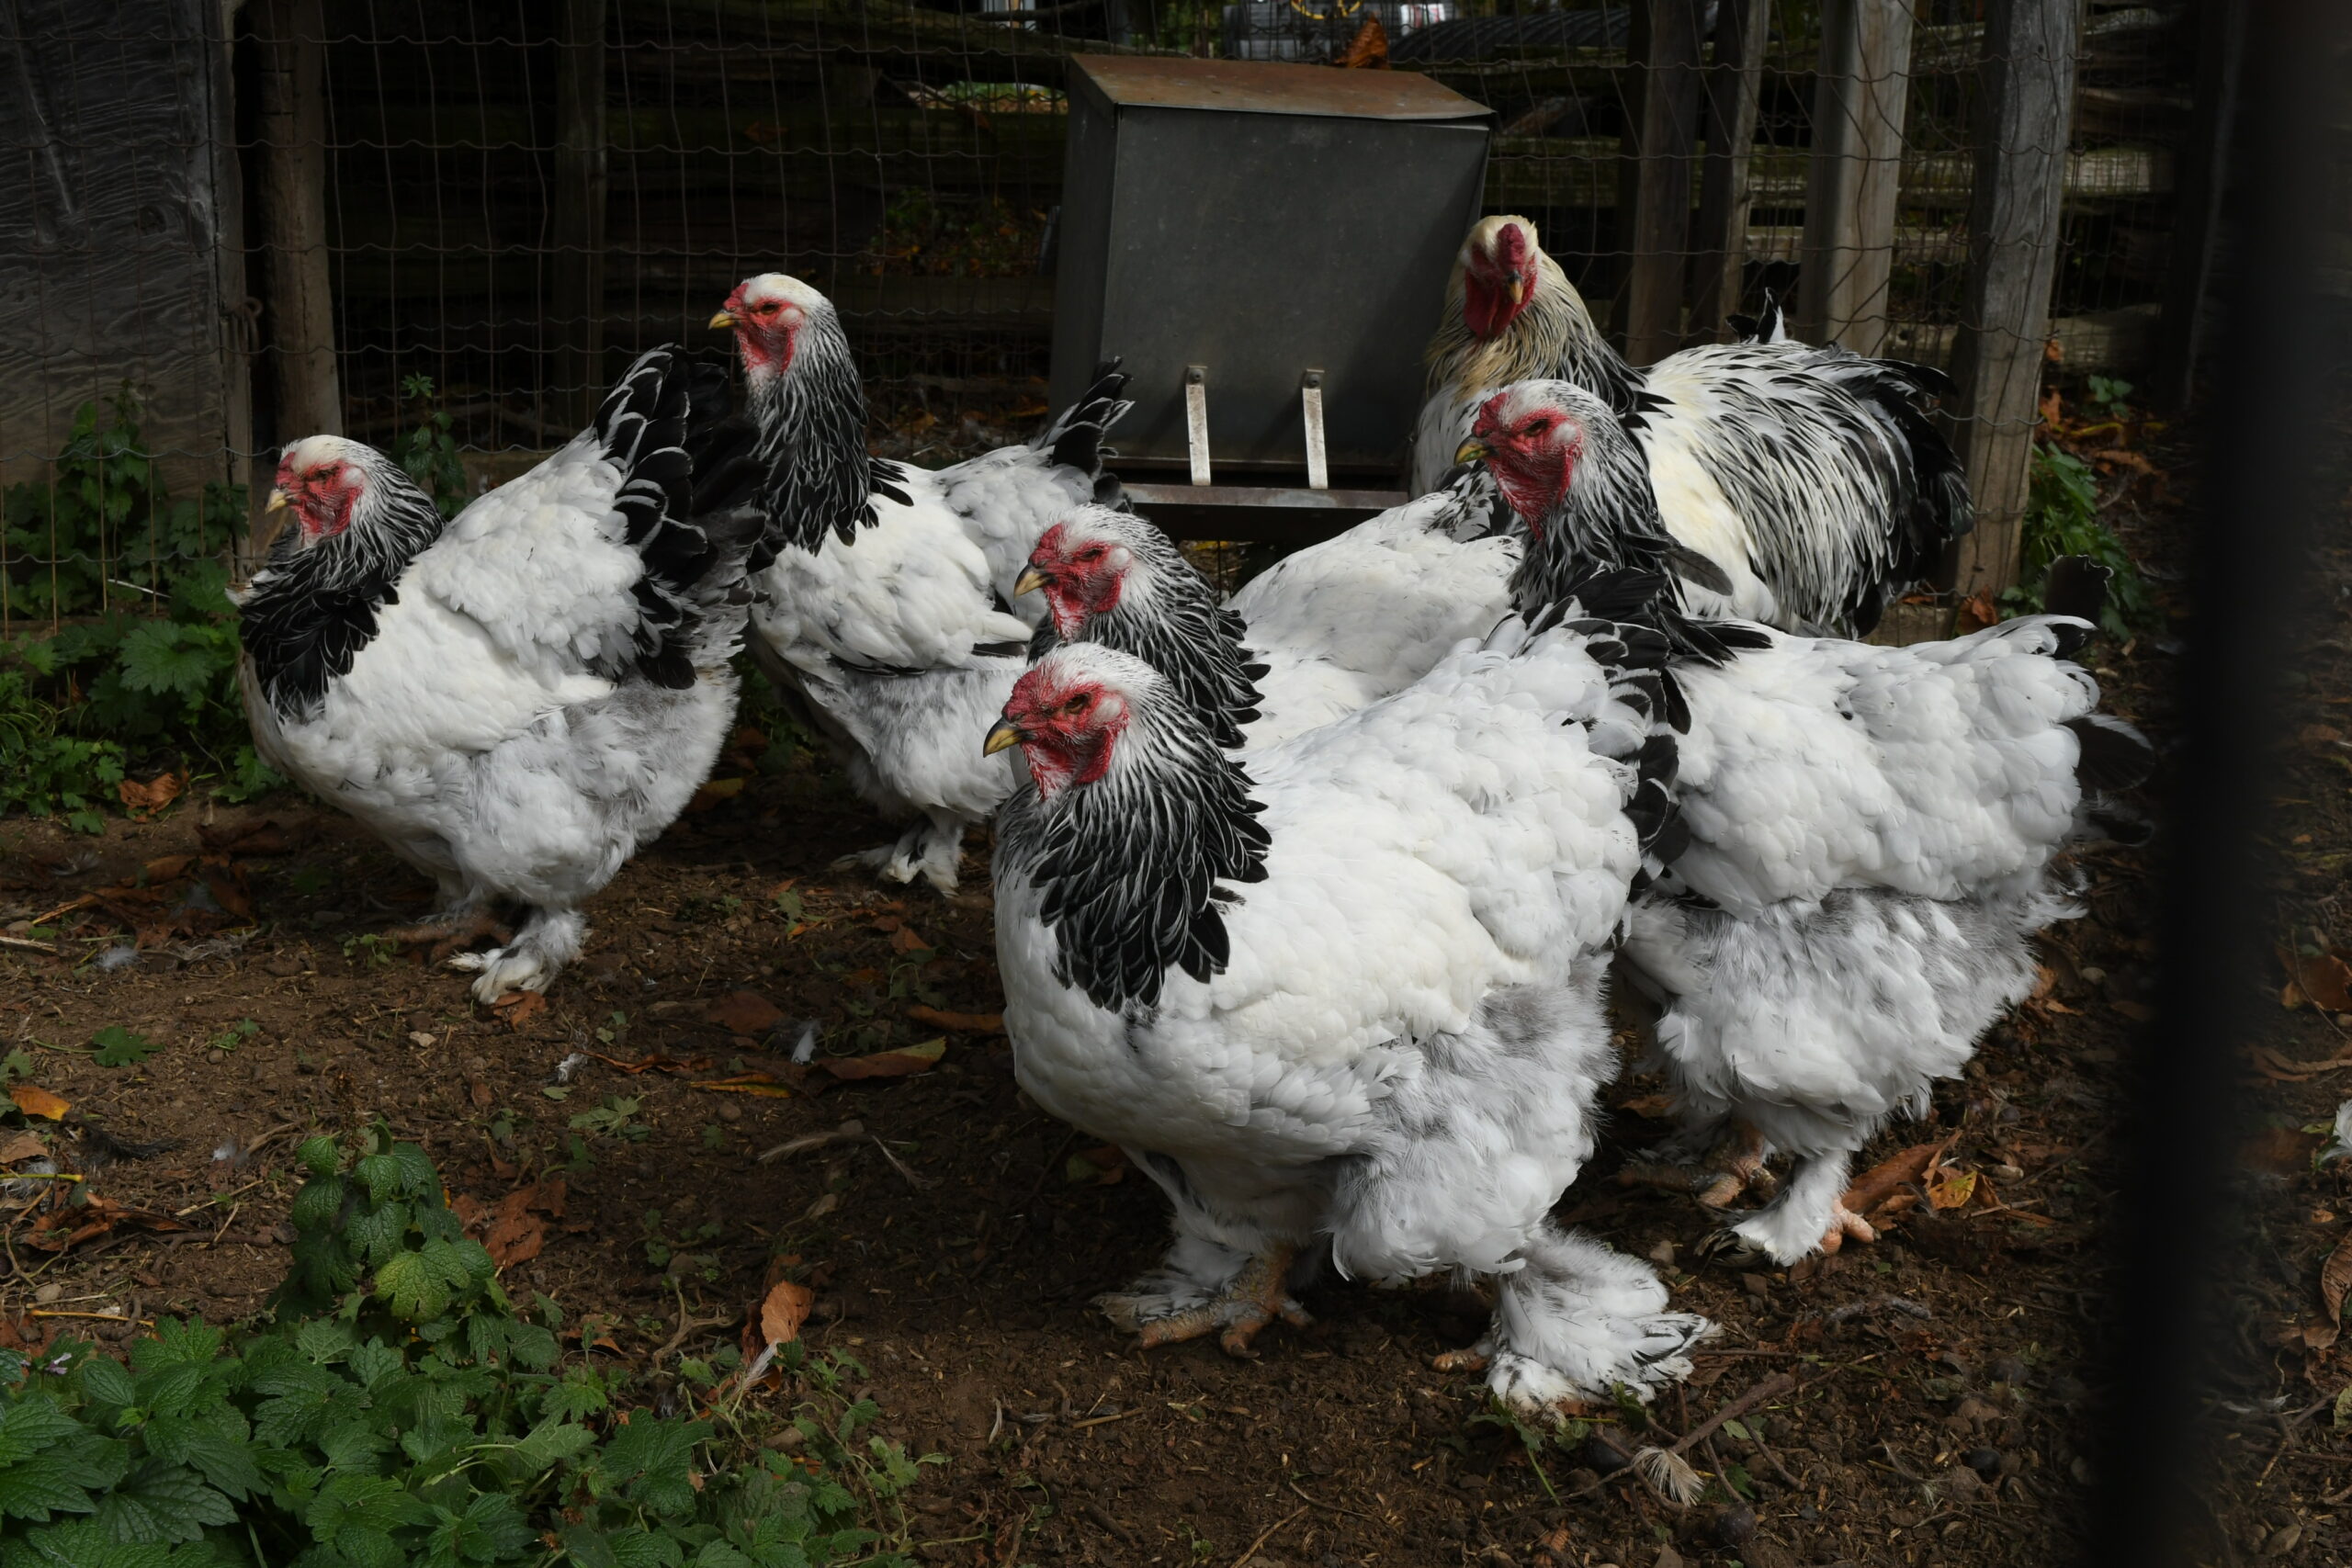 File:Two Giant Brahma chickens.jpg - Wikimedia Commons